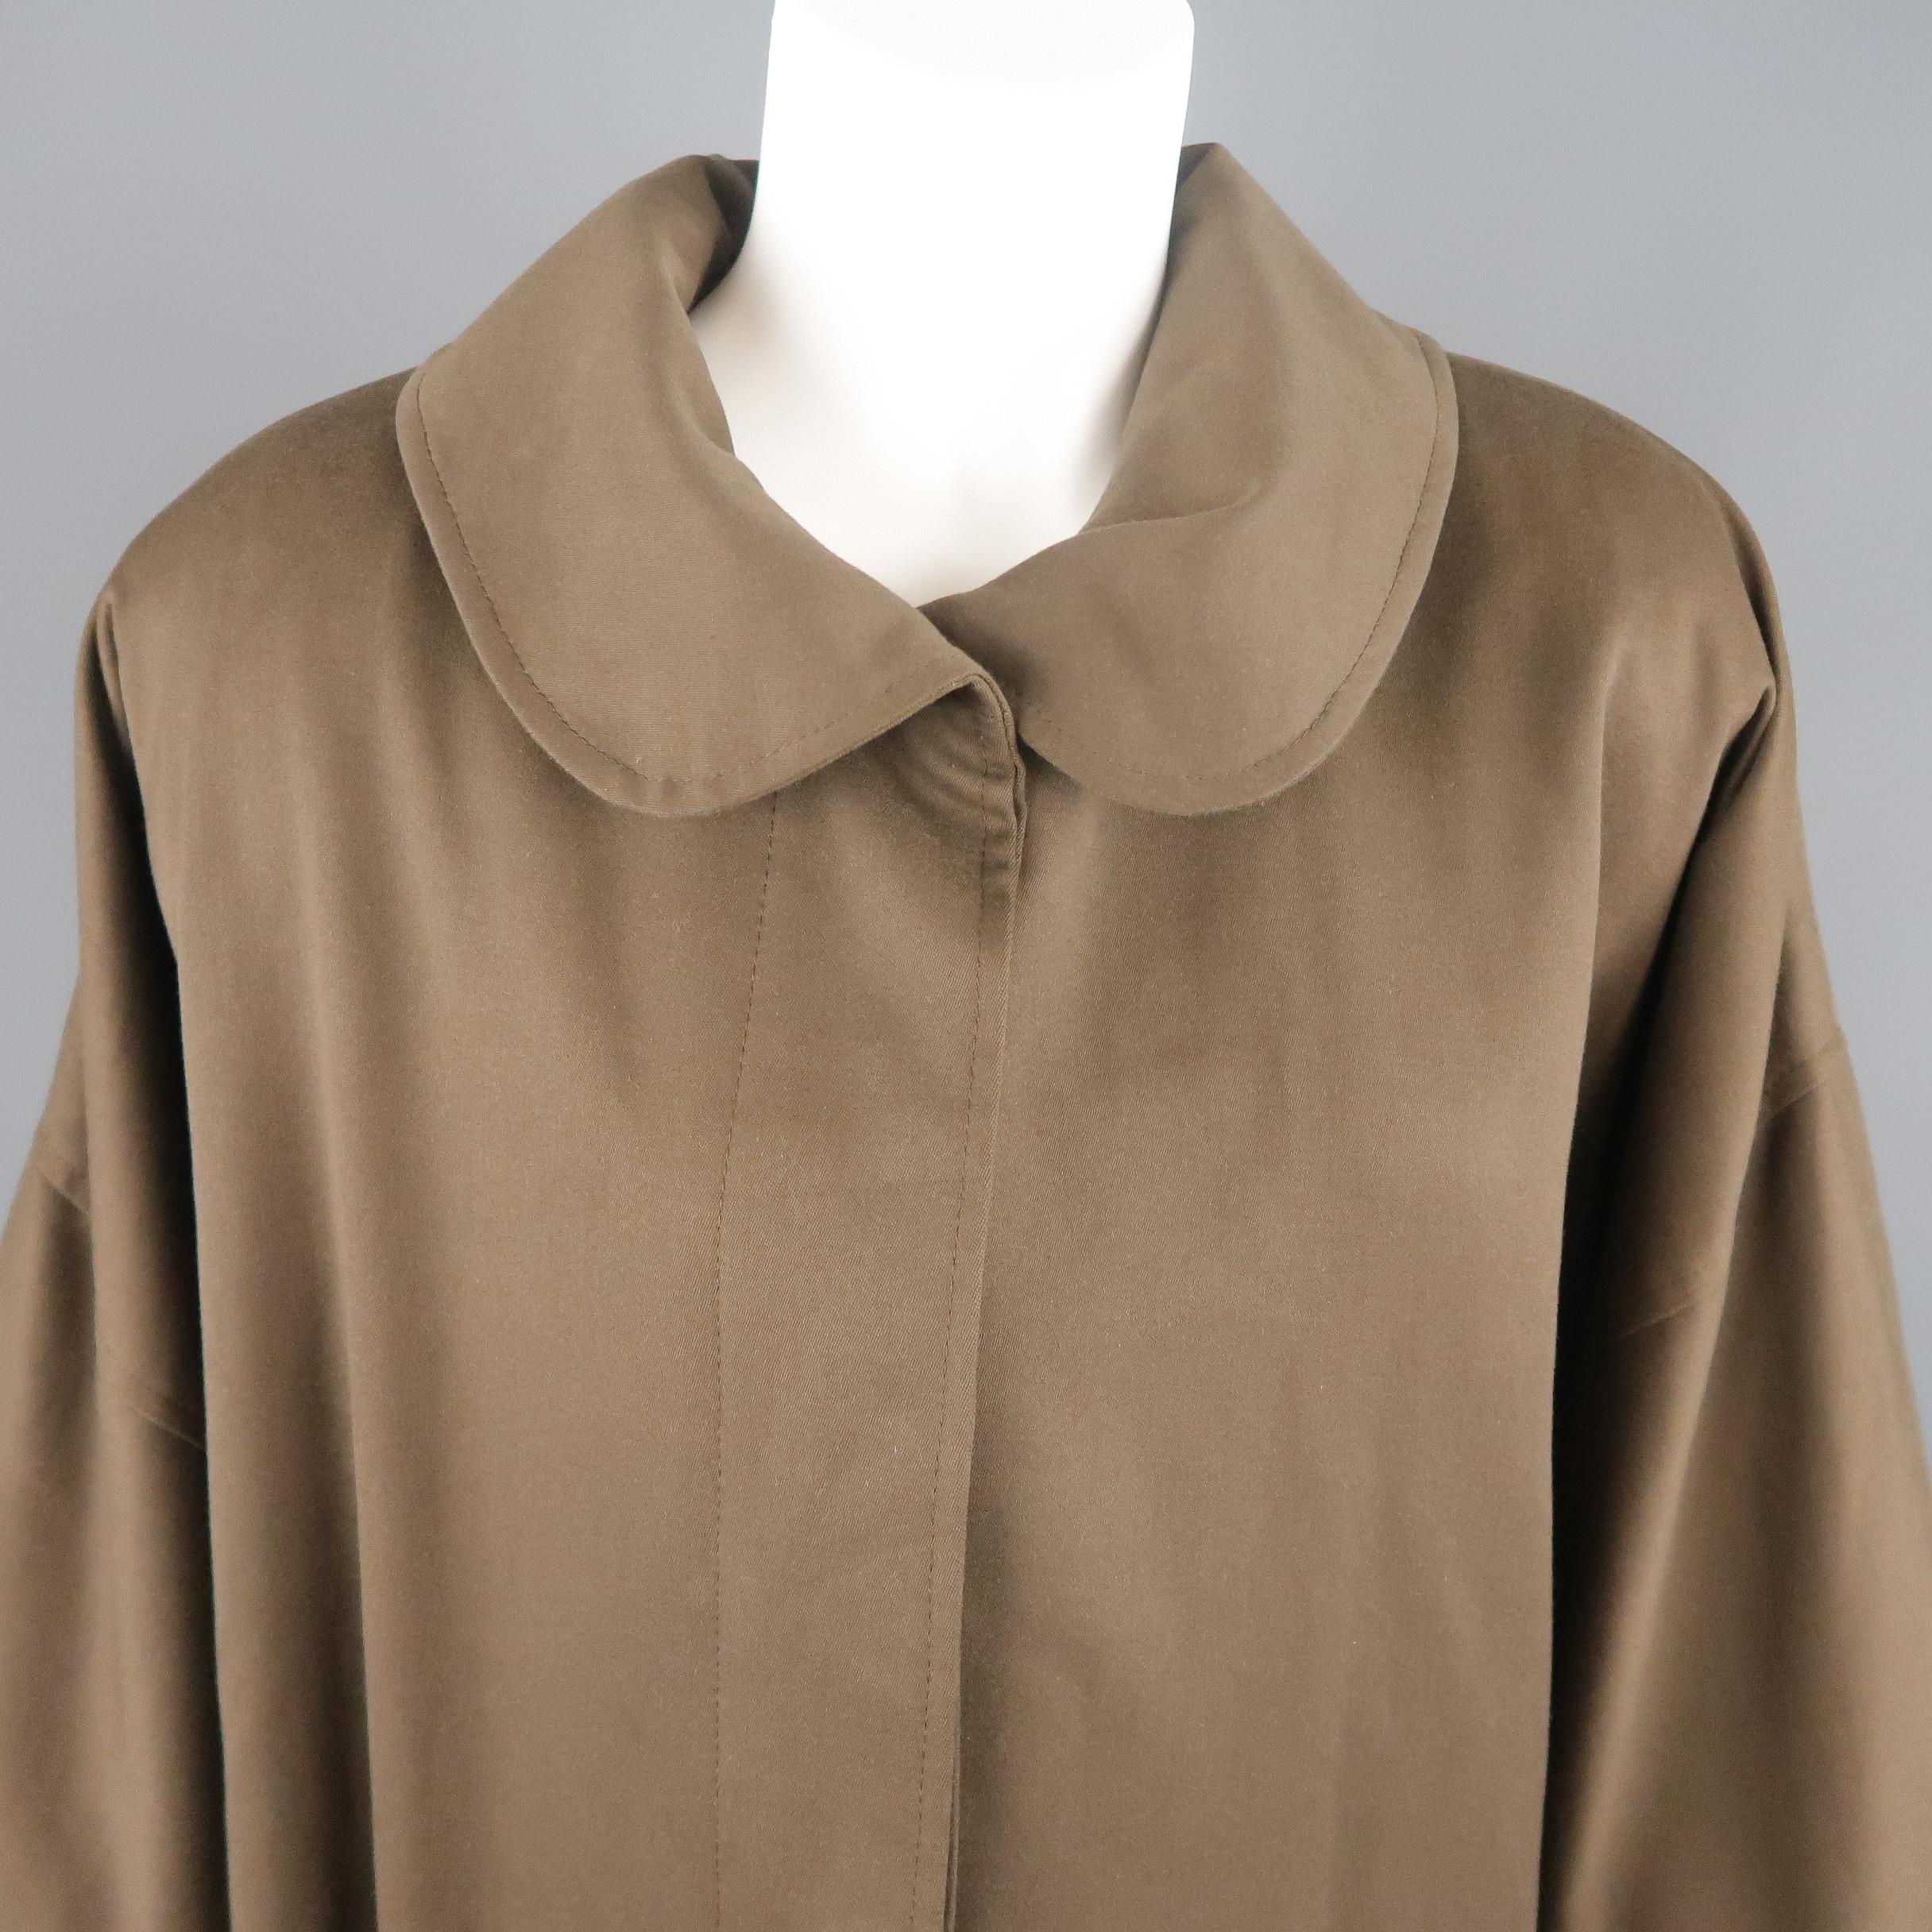 Vintage circa 1983 FENDI over coat comes in olive khaki gabardine with a padded drop shoulder, round collar, cuffed sleeves, Back belt, and hidden placket button front. Made in Italy.
 
Good Pre-Owned Condition.
Marked: (no size)
 
Measurements:
